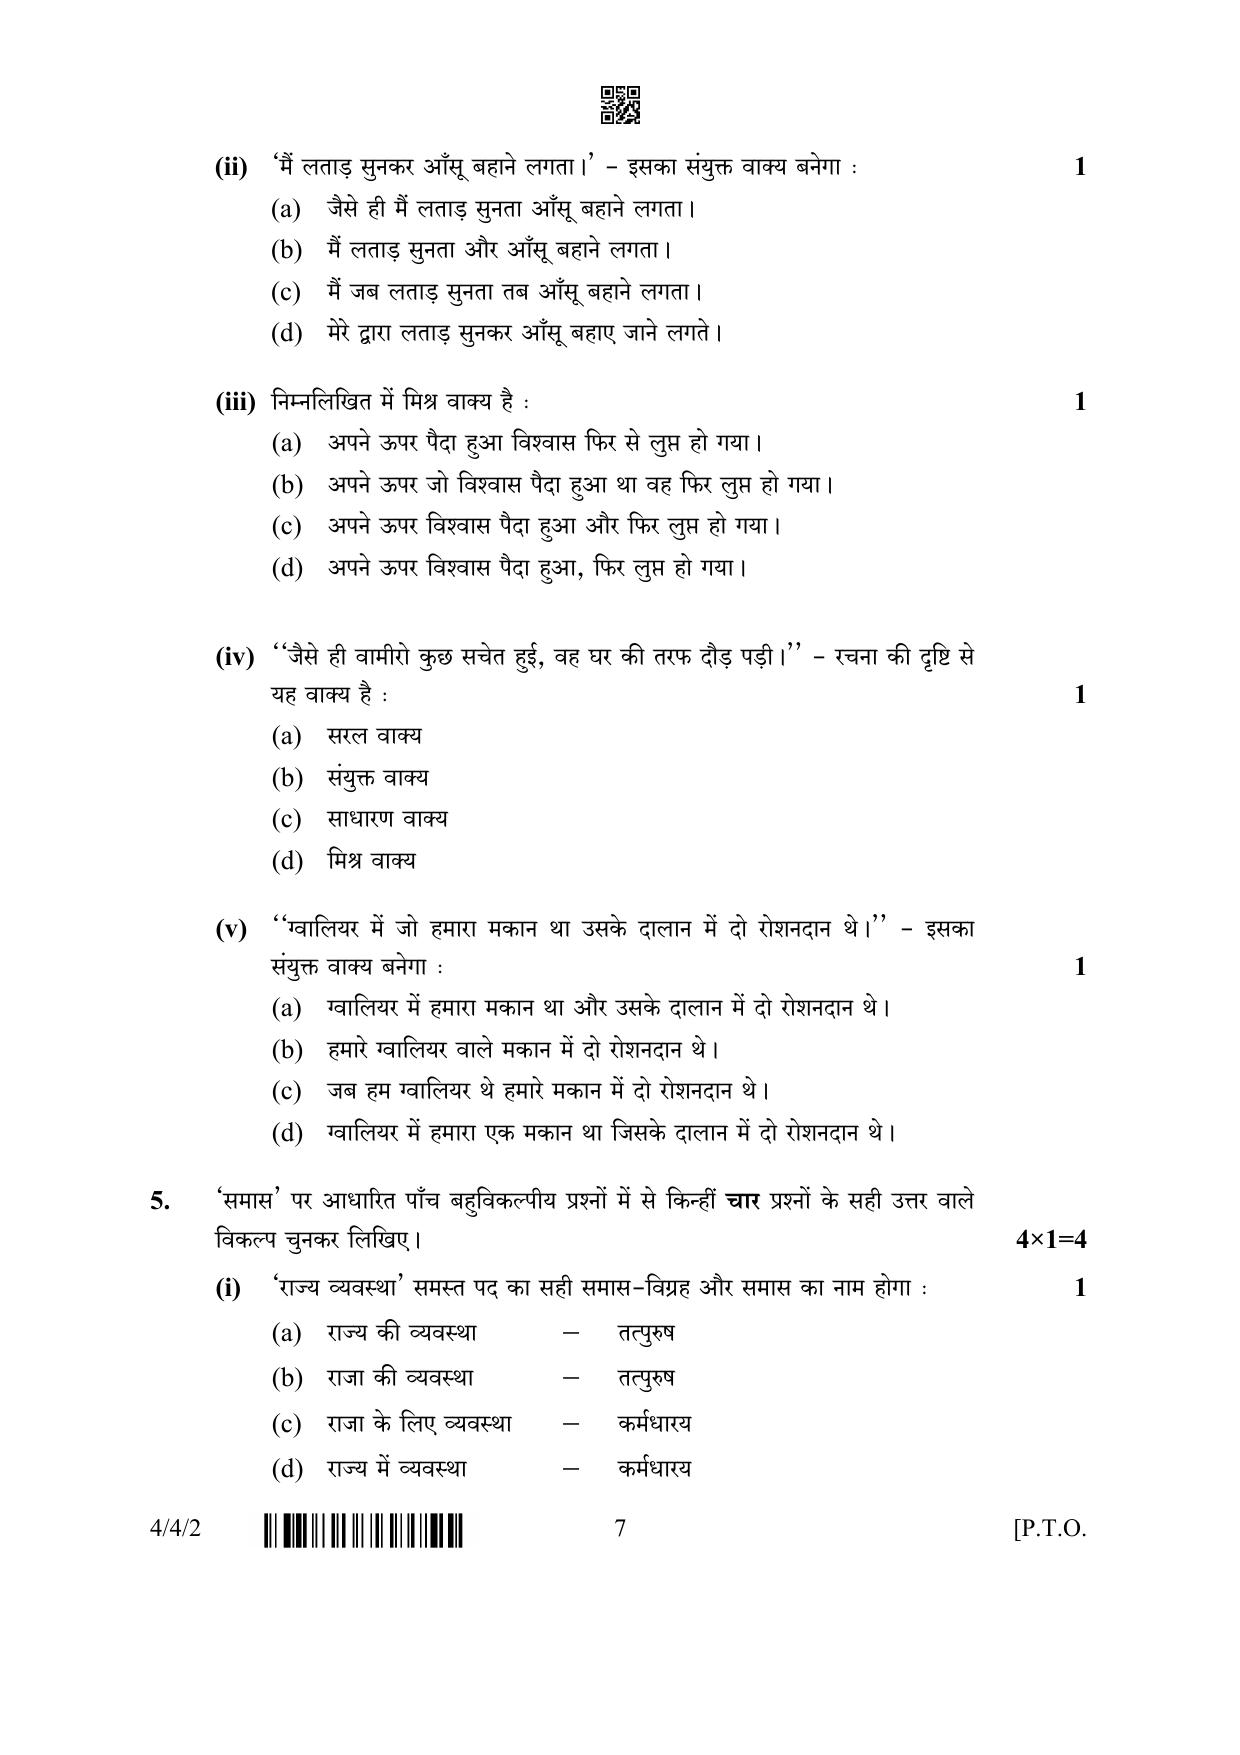 CBSE Class 10 4-4-2 Hindi B 2023 Question Paper - Page 7